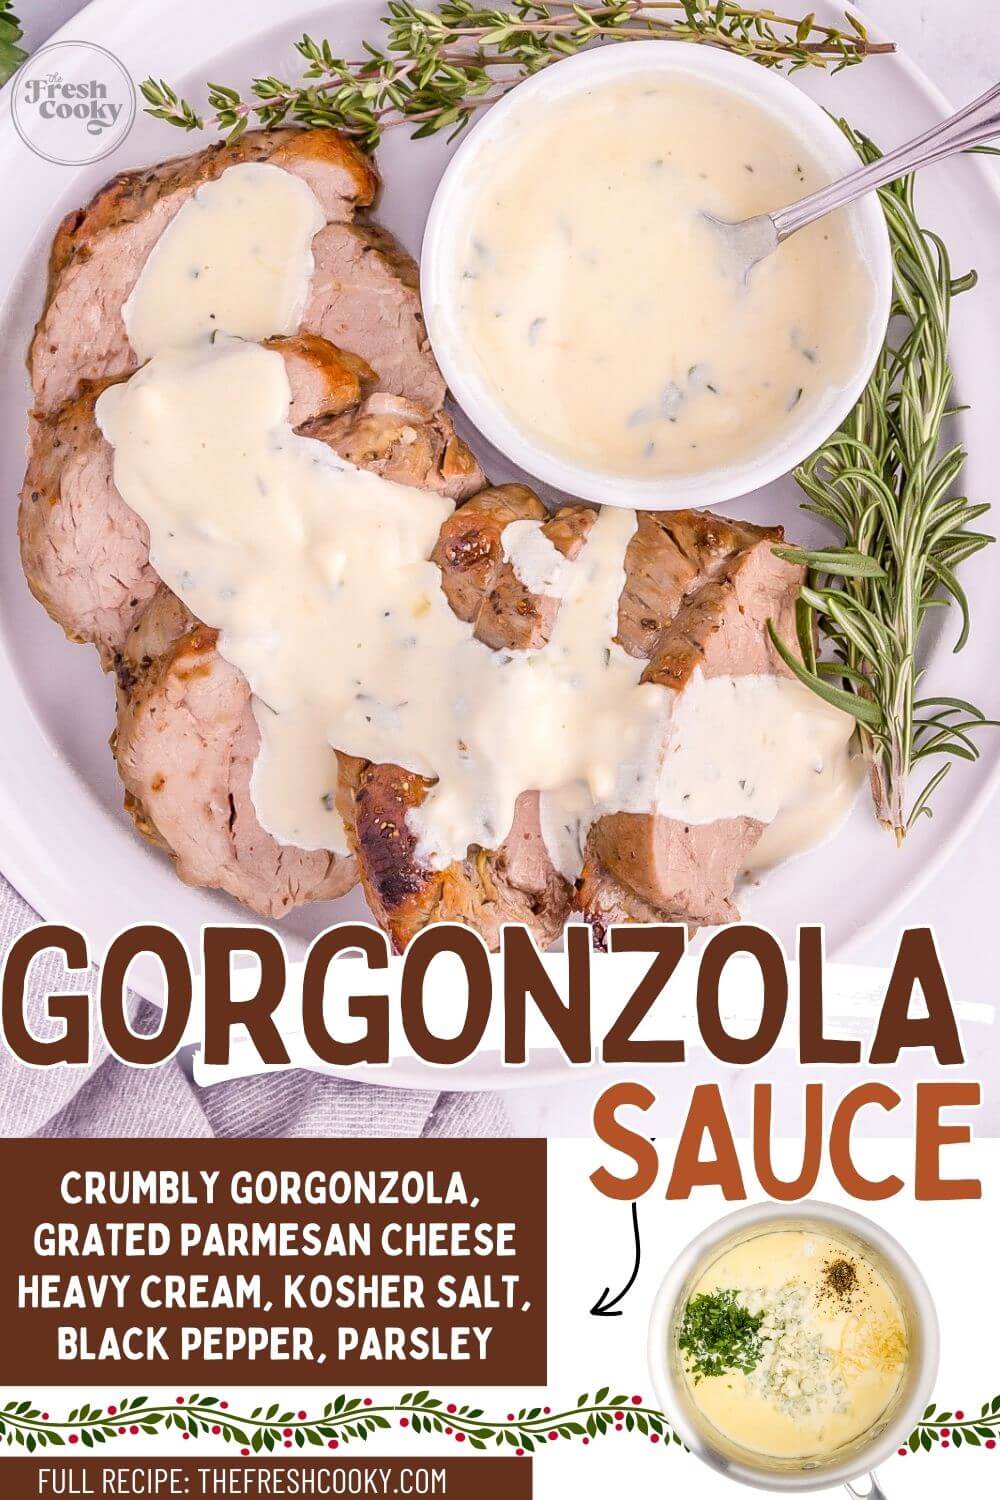 Meat slices covered in Gorgonzola sauce surround a smaller bowl of sauce next to herb sprigs.